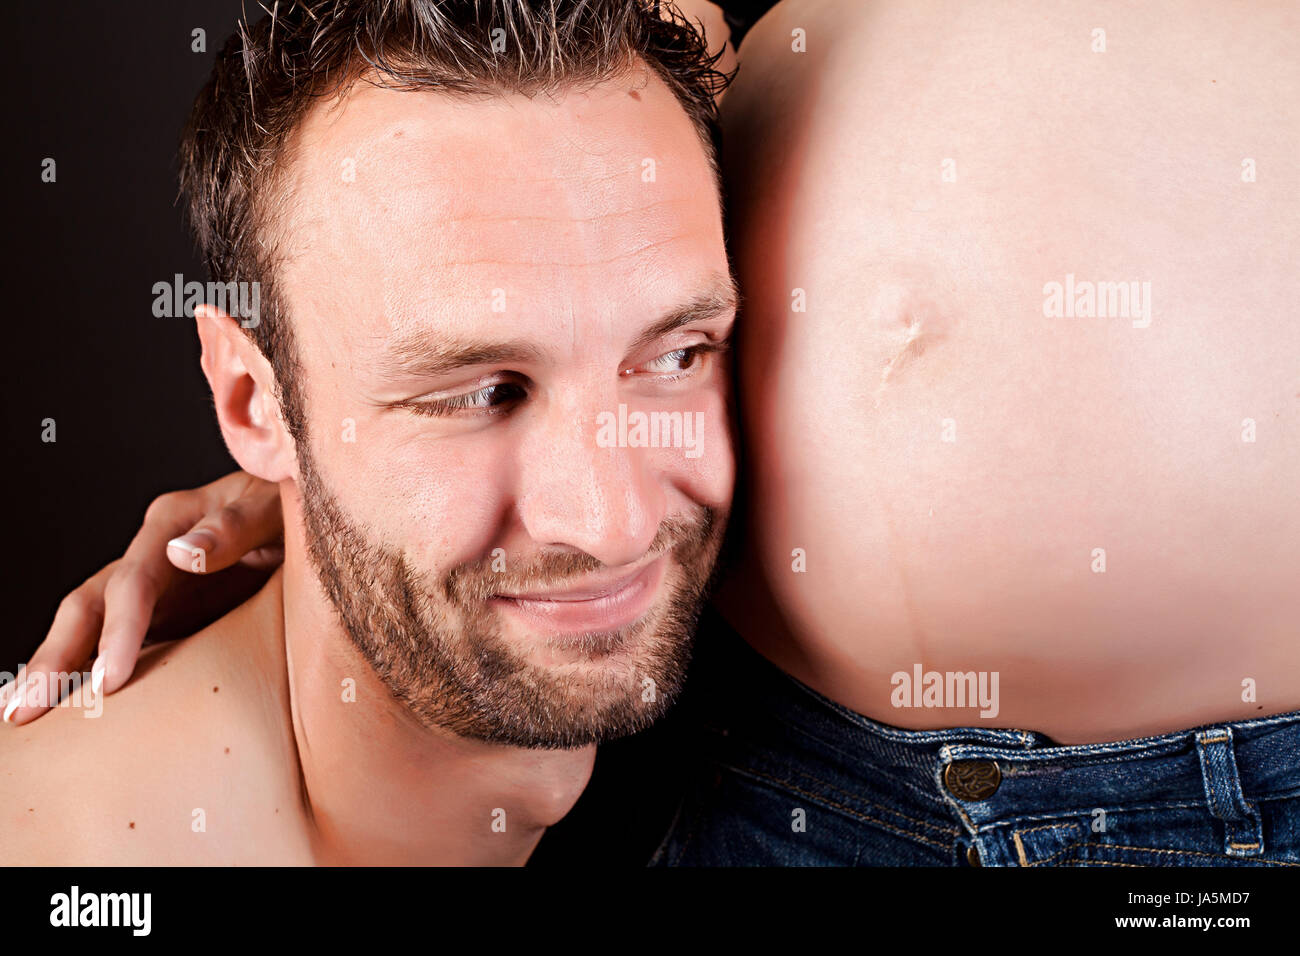 woman, wait, waiting, laugh, laughs, laughing, twit, giggle, smile, smiling, Stock Photo